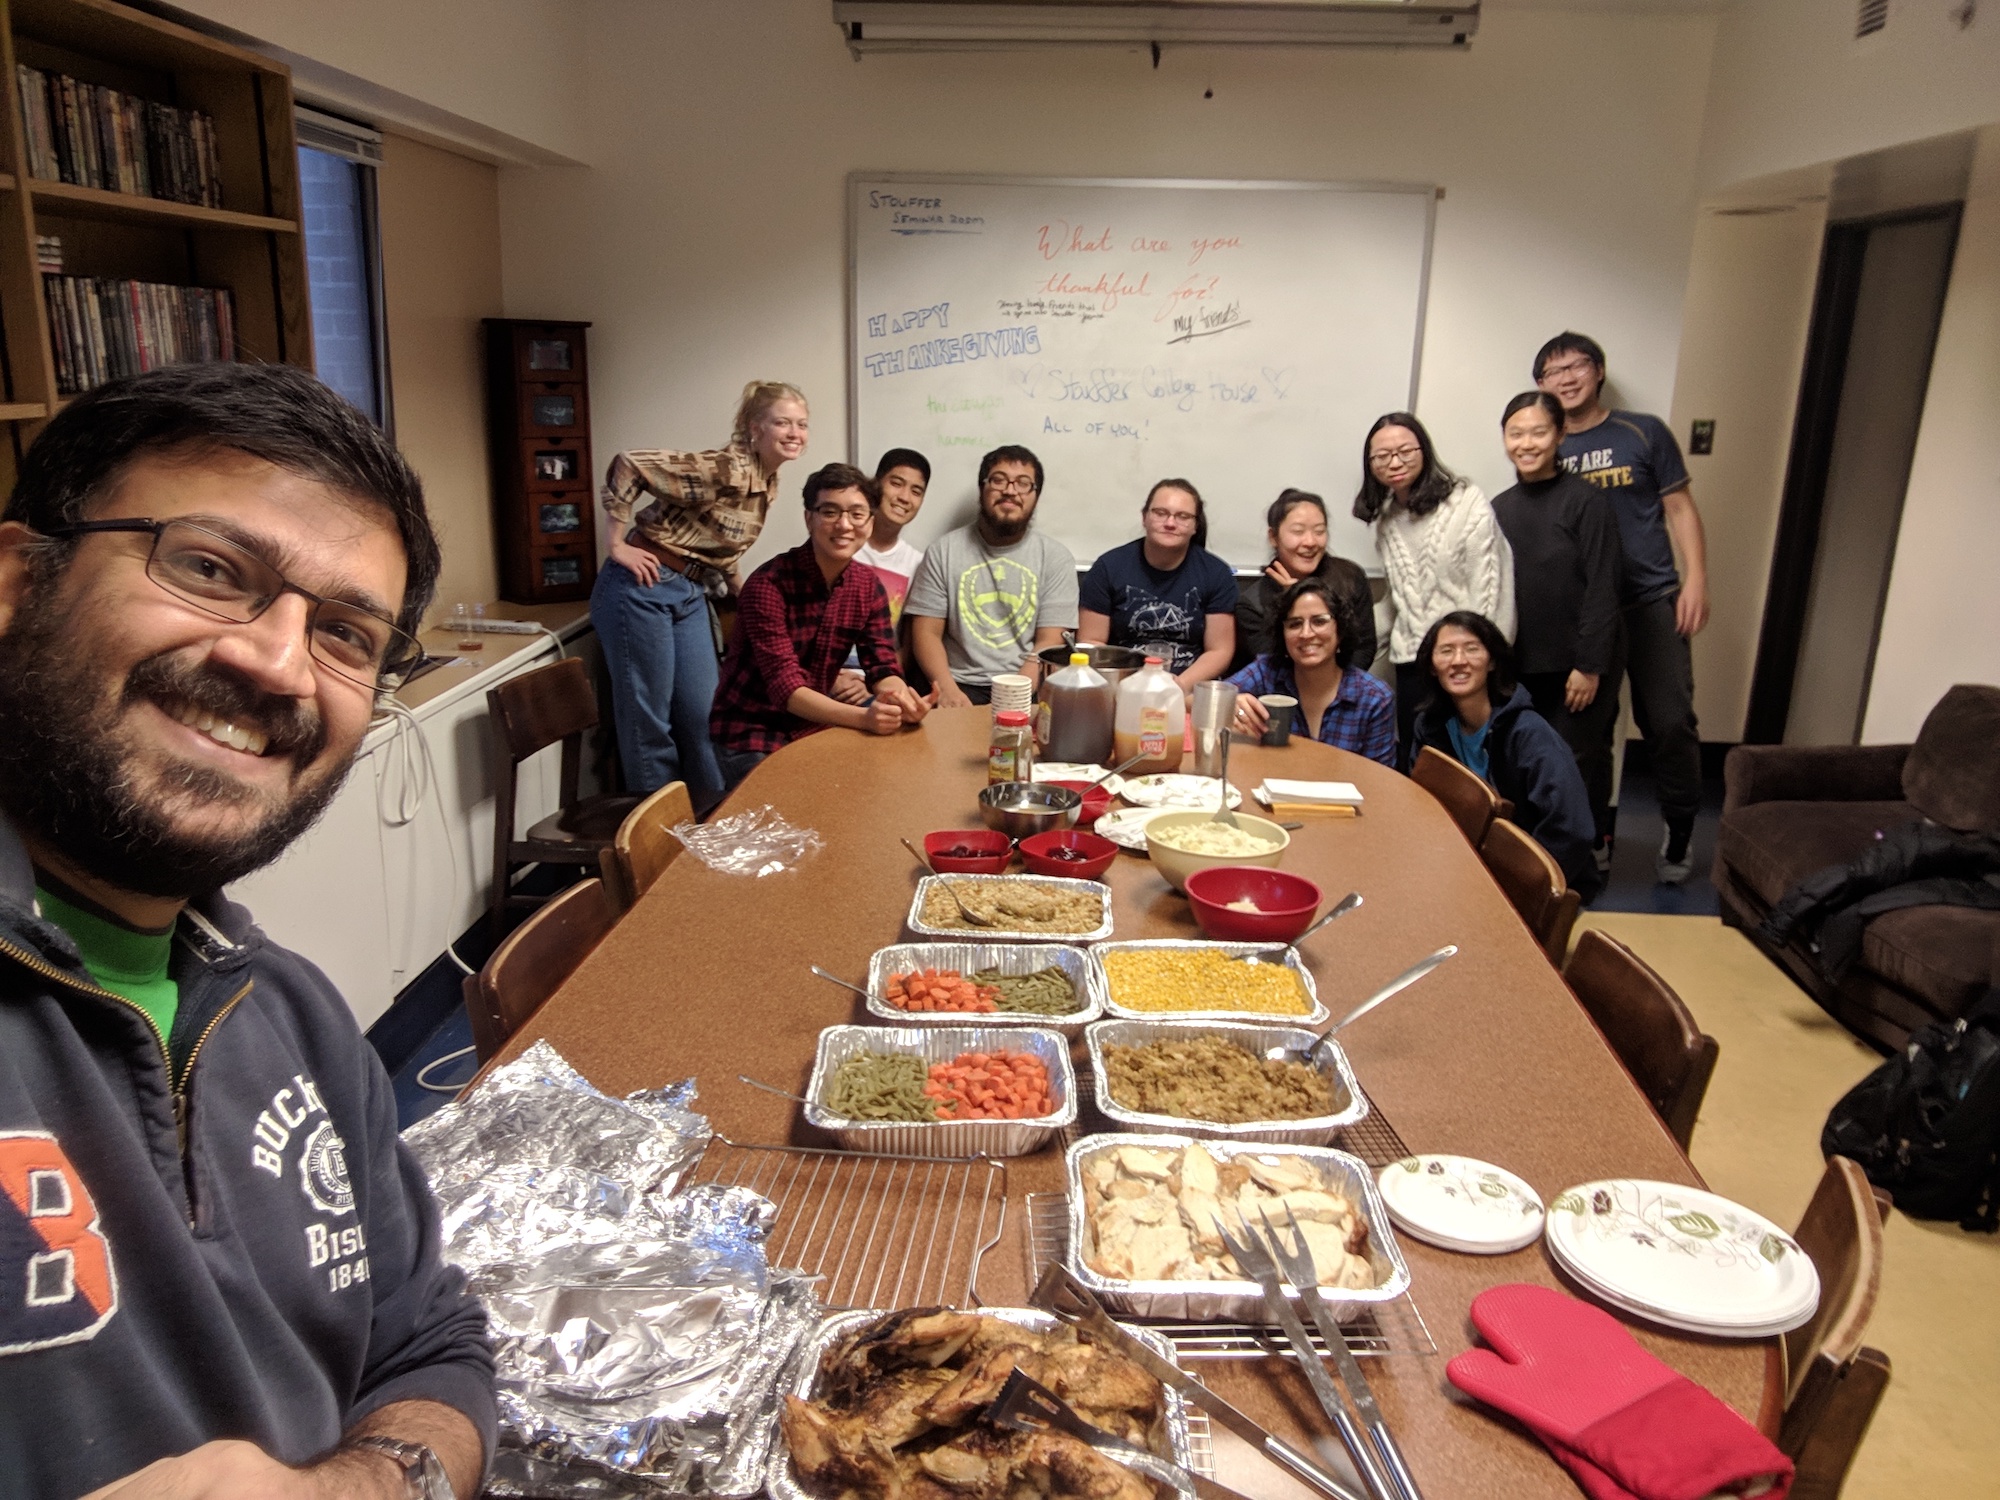 Nadir Sharif takes a selfie with a table full of Thanksgiving food and a group of college students behind him. A whiteboard at the back of the room reads "What are you thankful for?"